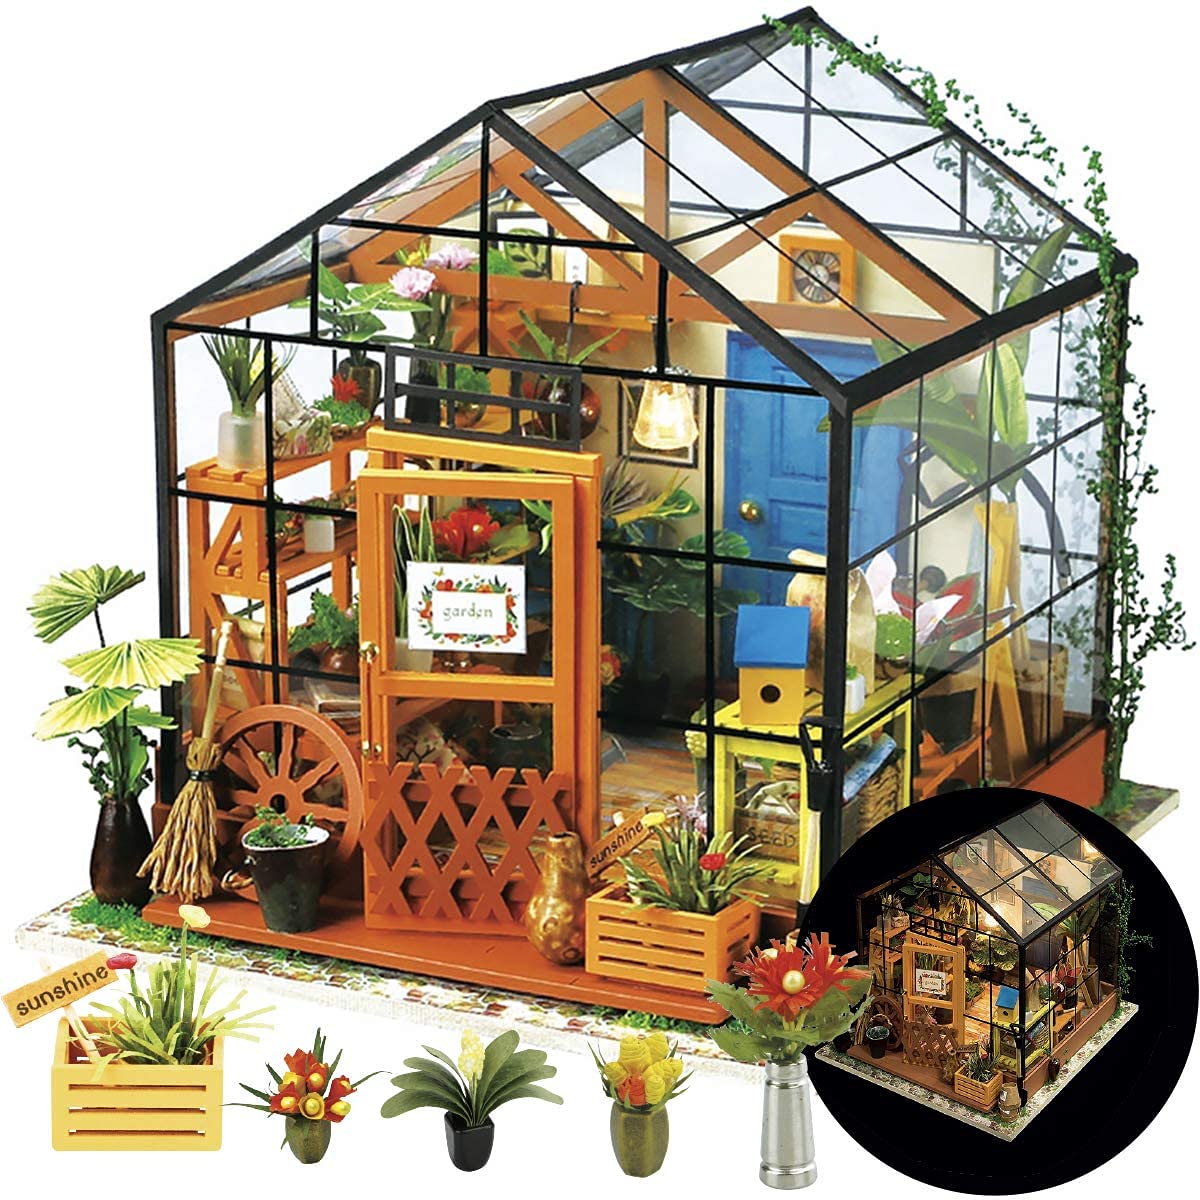 Rolife DIY Miniatures Dollhouse Kit, Miniature Greenhouse DIY Craft Kits for Adult to Build Tiny House Model (Cathy's Greenhouse+Alice's Tea Store)